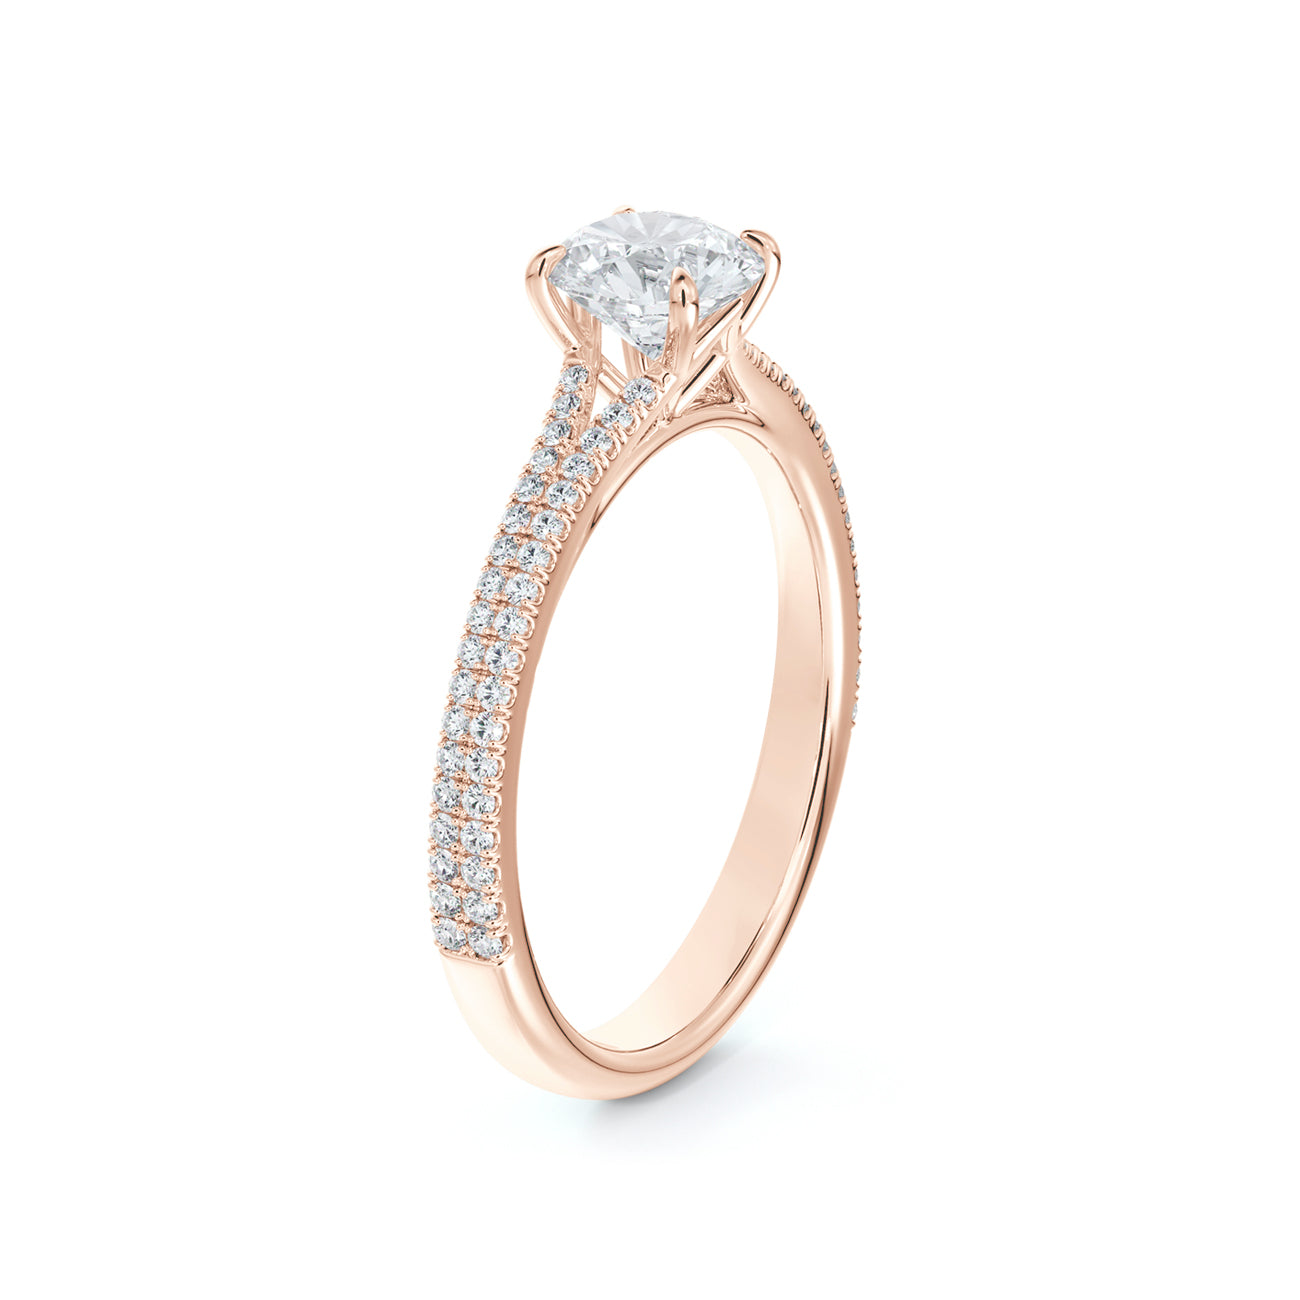 de Beers Forevermark Solitaire Engagement Ring